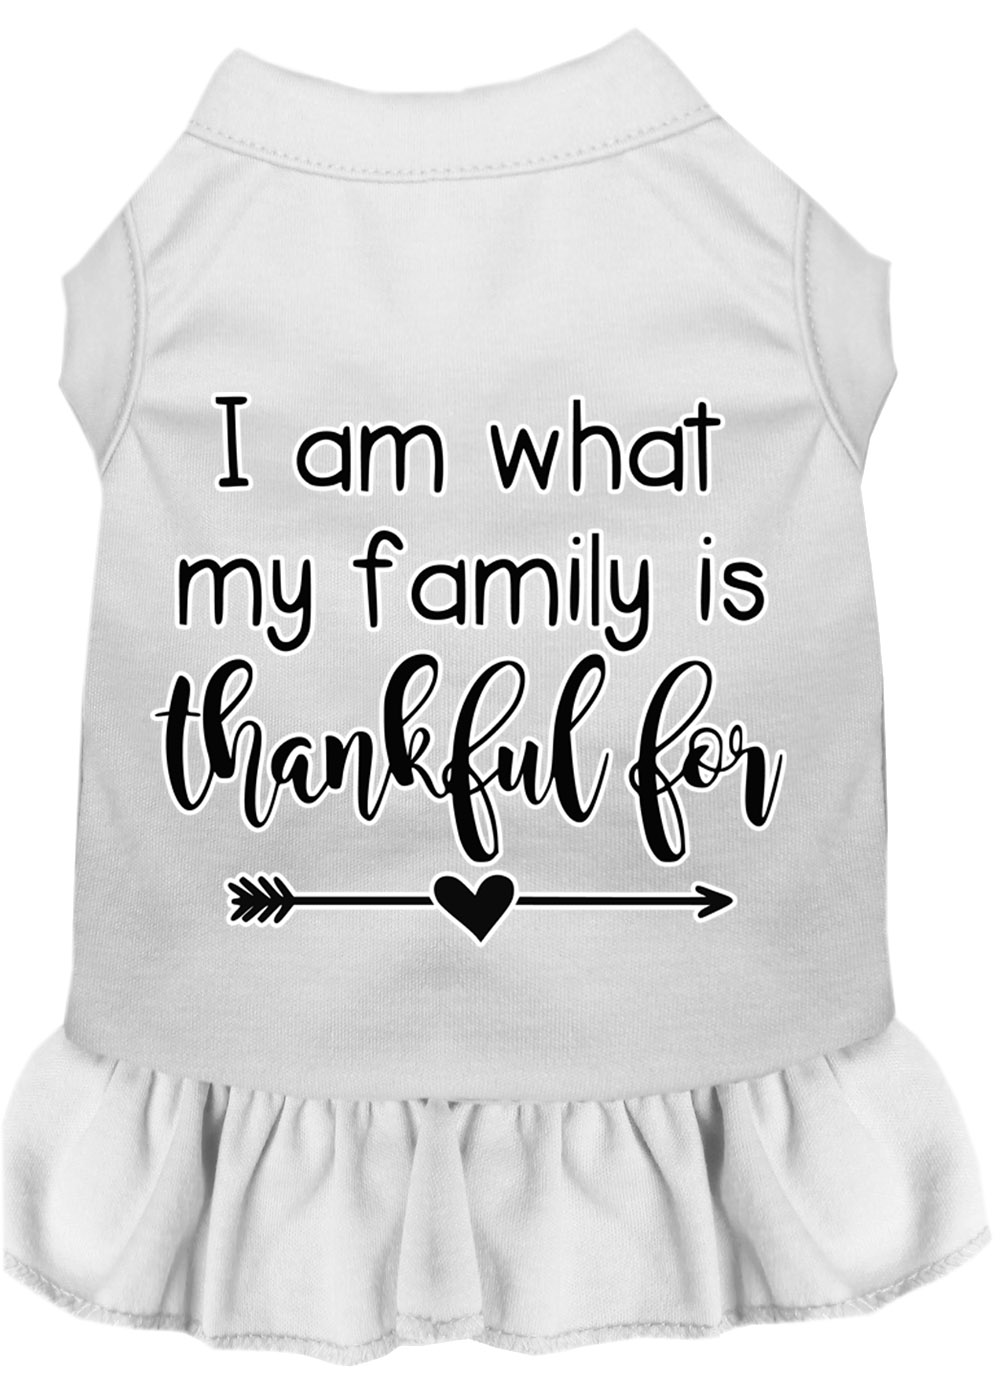 I Am What My Family is Thankful For Screen Print Dog Dress White XXXL